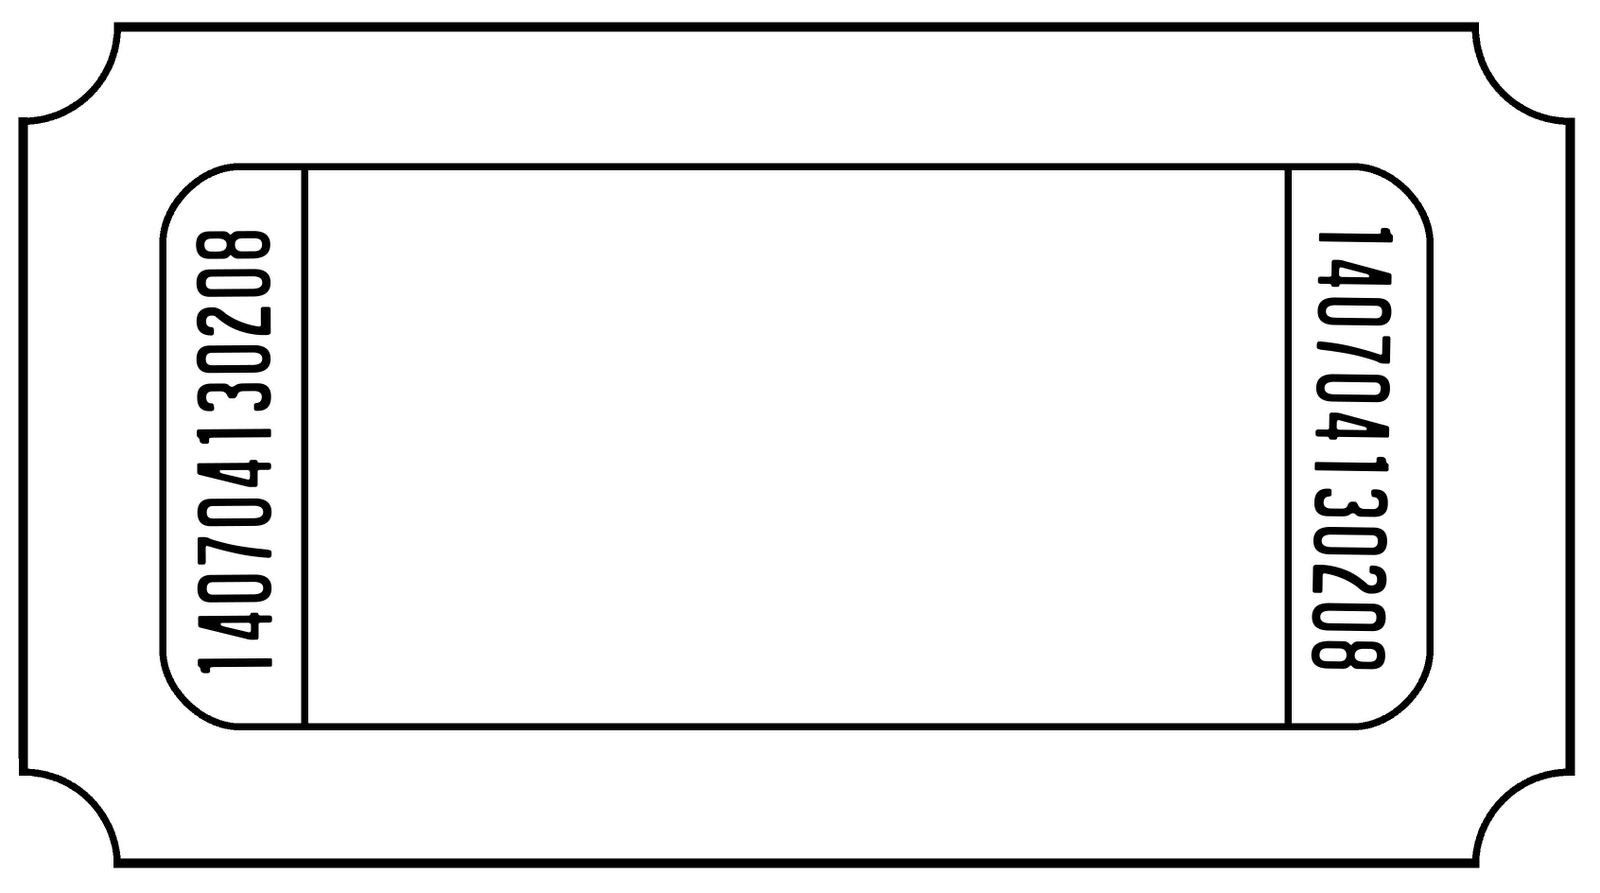 circus ticket blank template